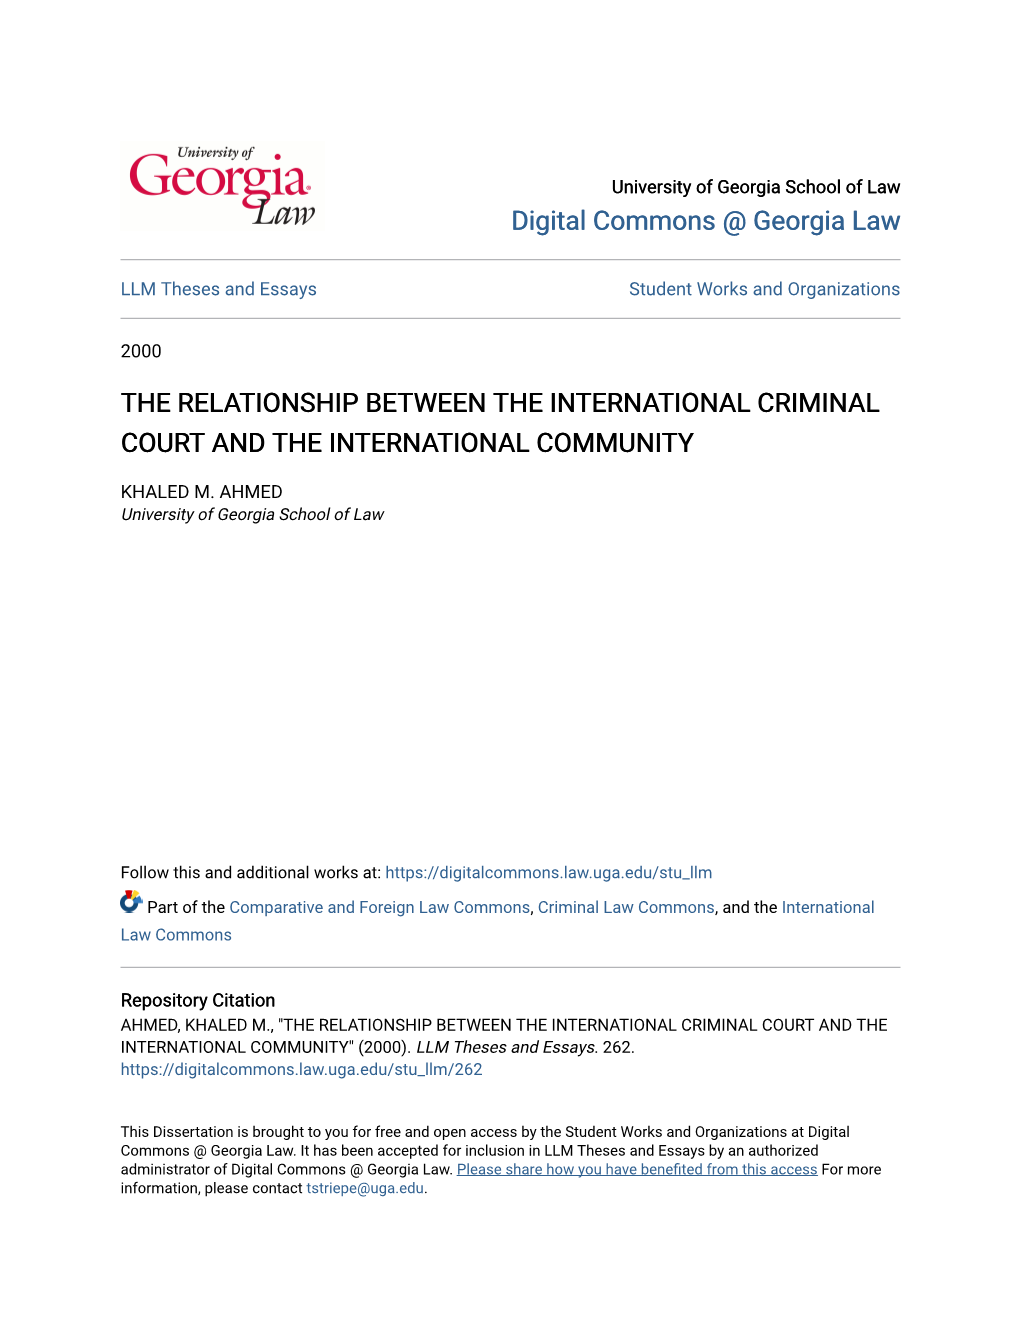 The Relationship Between the International Criminal Court and the International Community